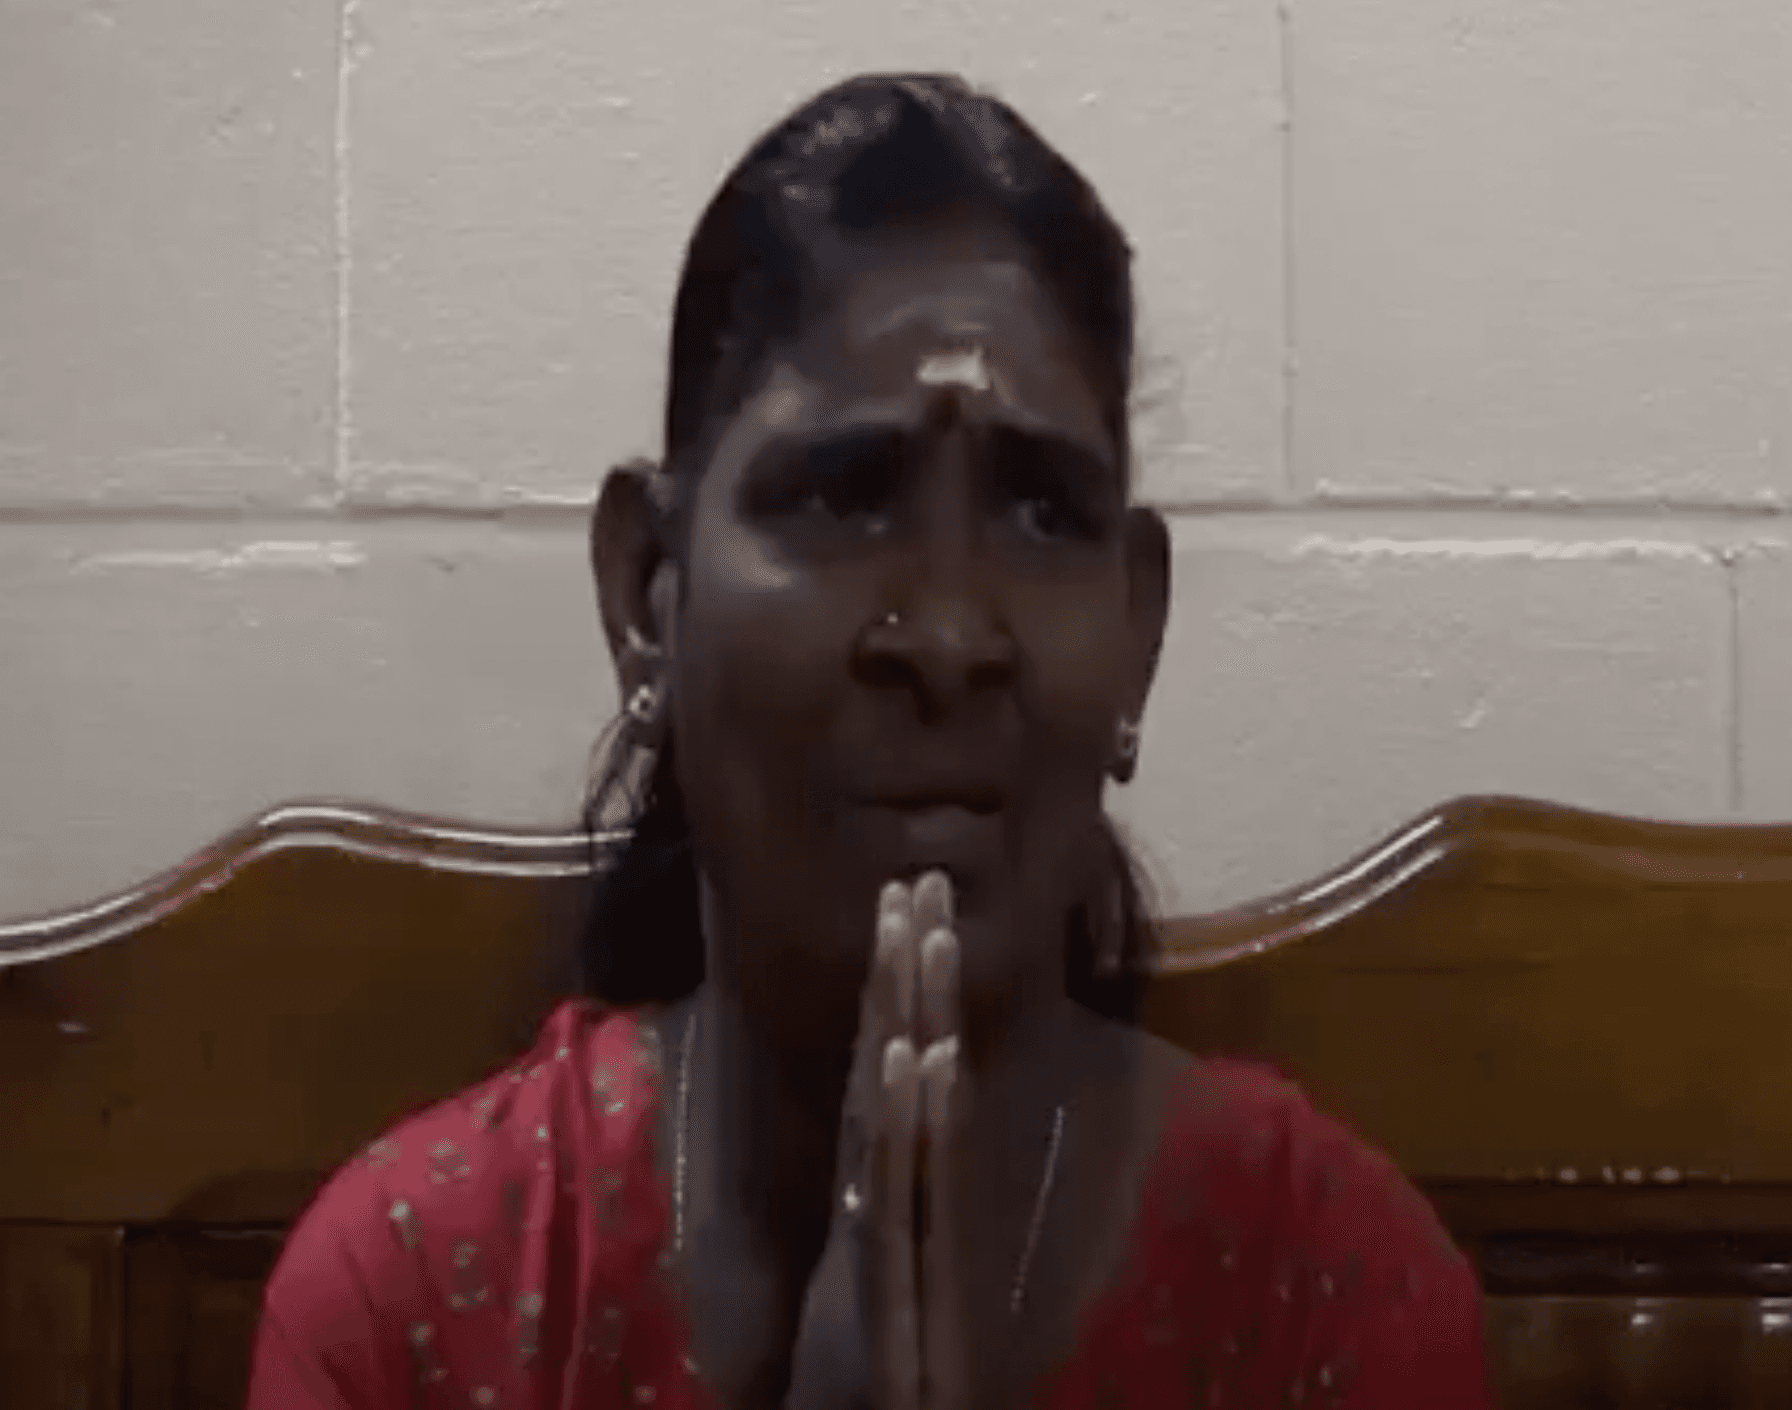 Nagaenthran K Dharmalingam's mother, Panchalai Supermaniam, pleads for her son's life ahead of his execution in Singapore.